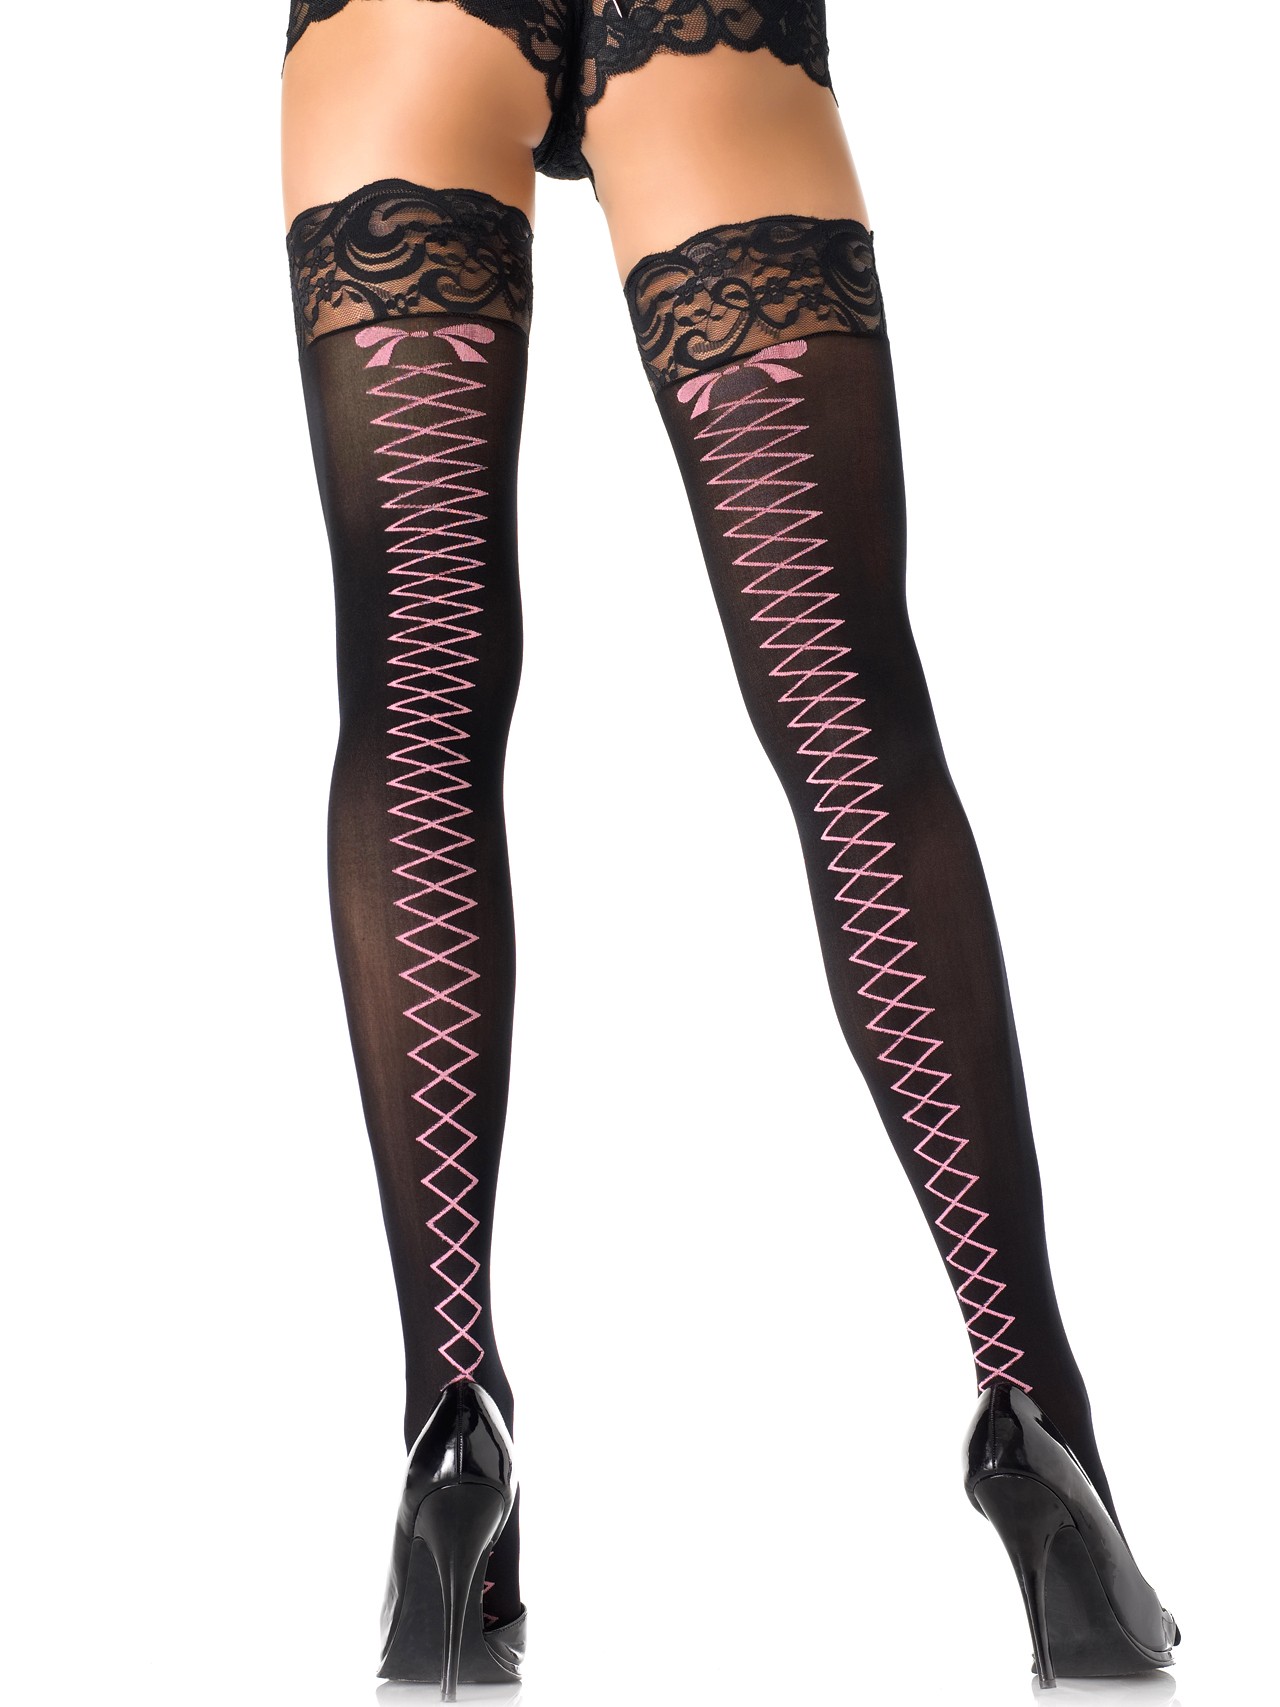 Lace Up Print Stay Up Stockings